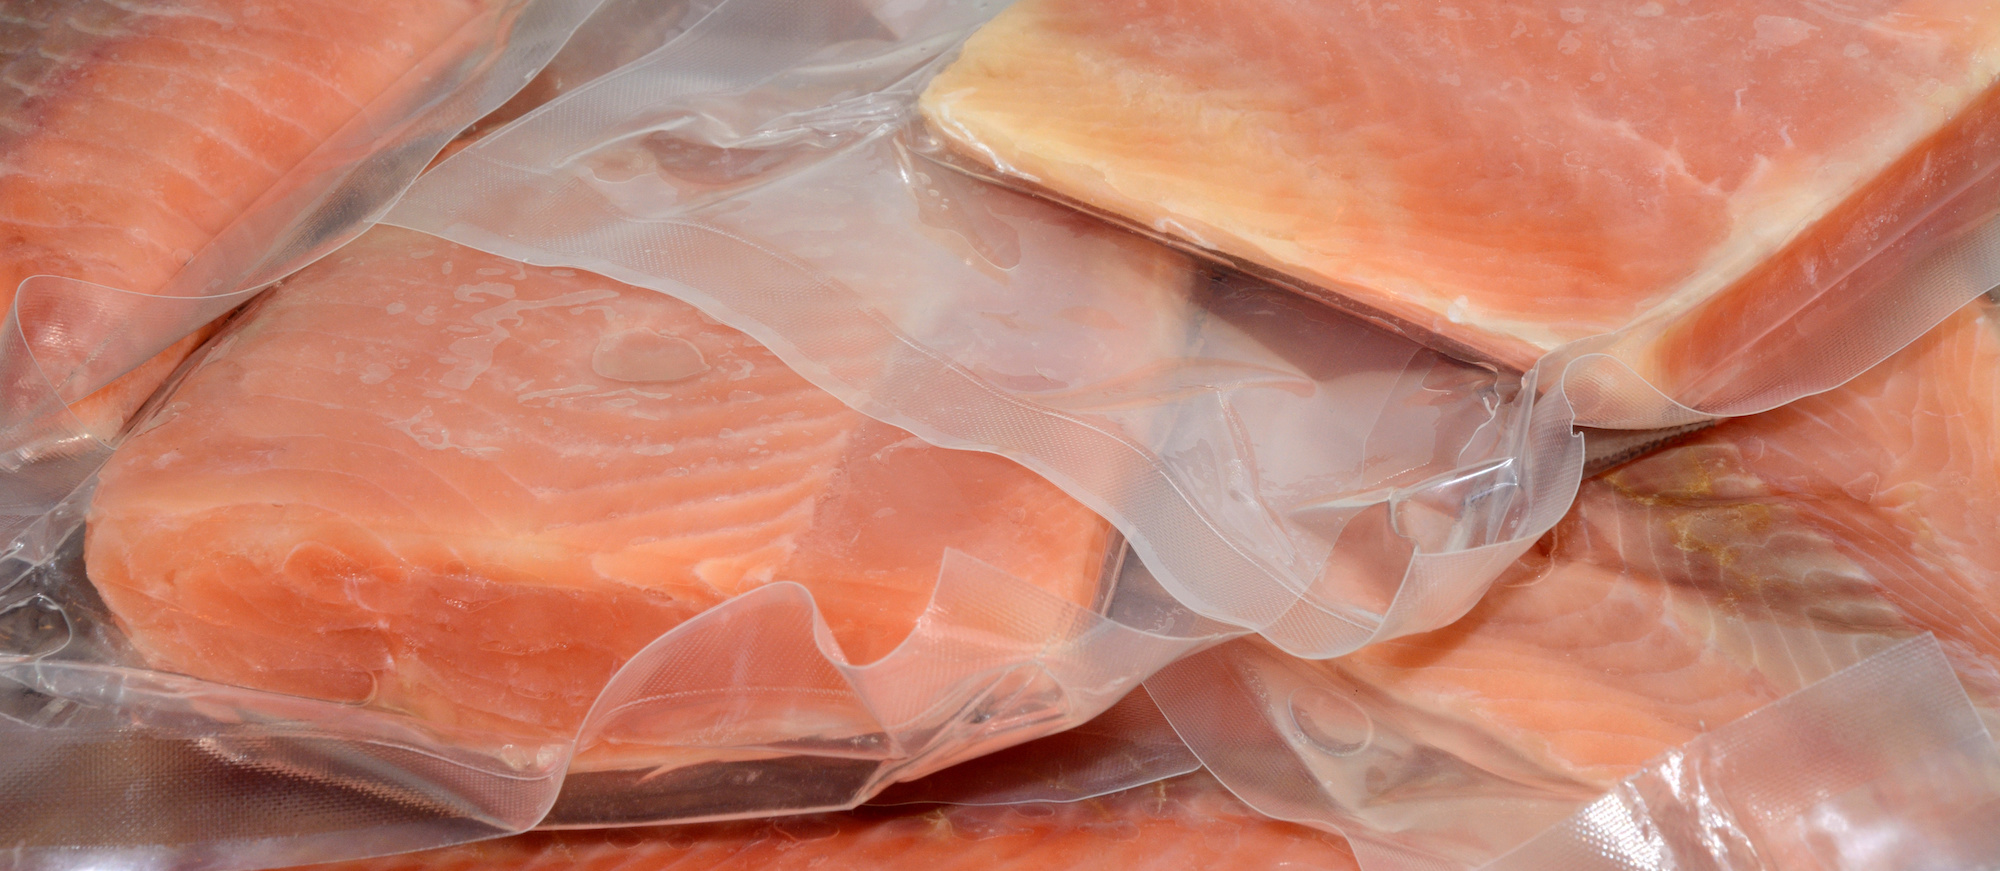 Frozen vacuum packed Salmon fillets in plastic ready to be packed in an insulated bag for a flight on an airplane